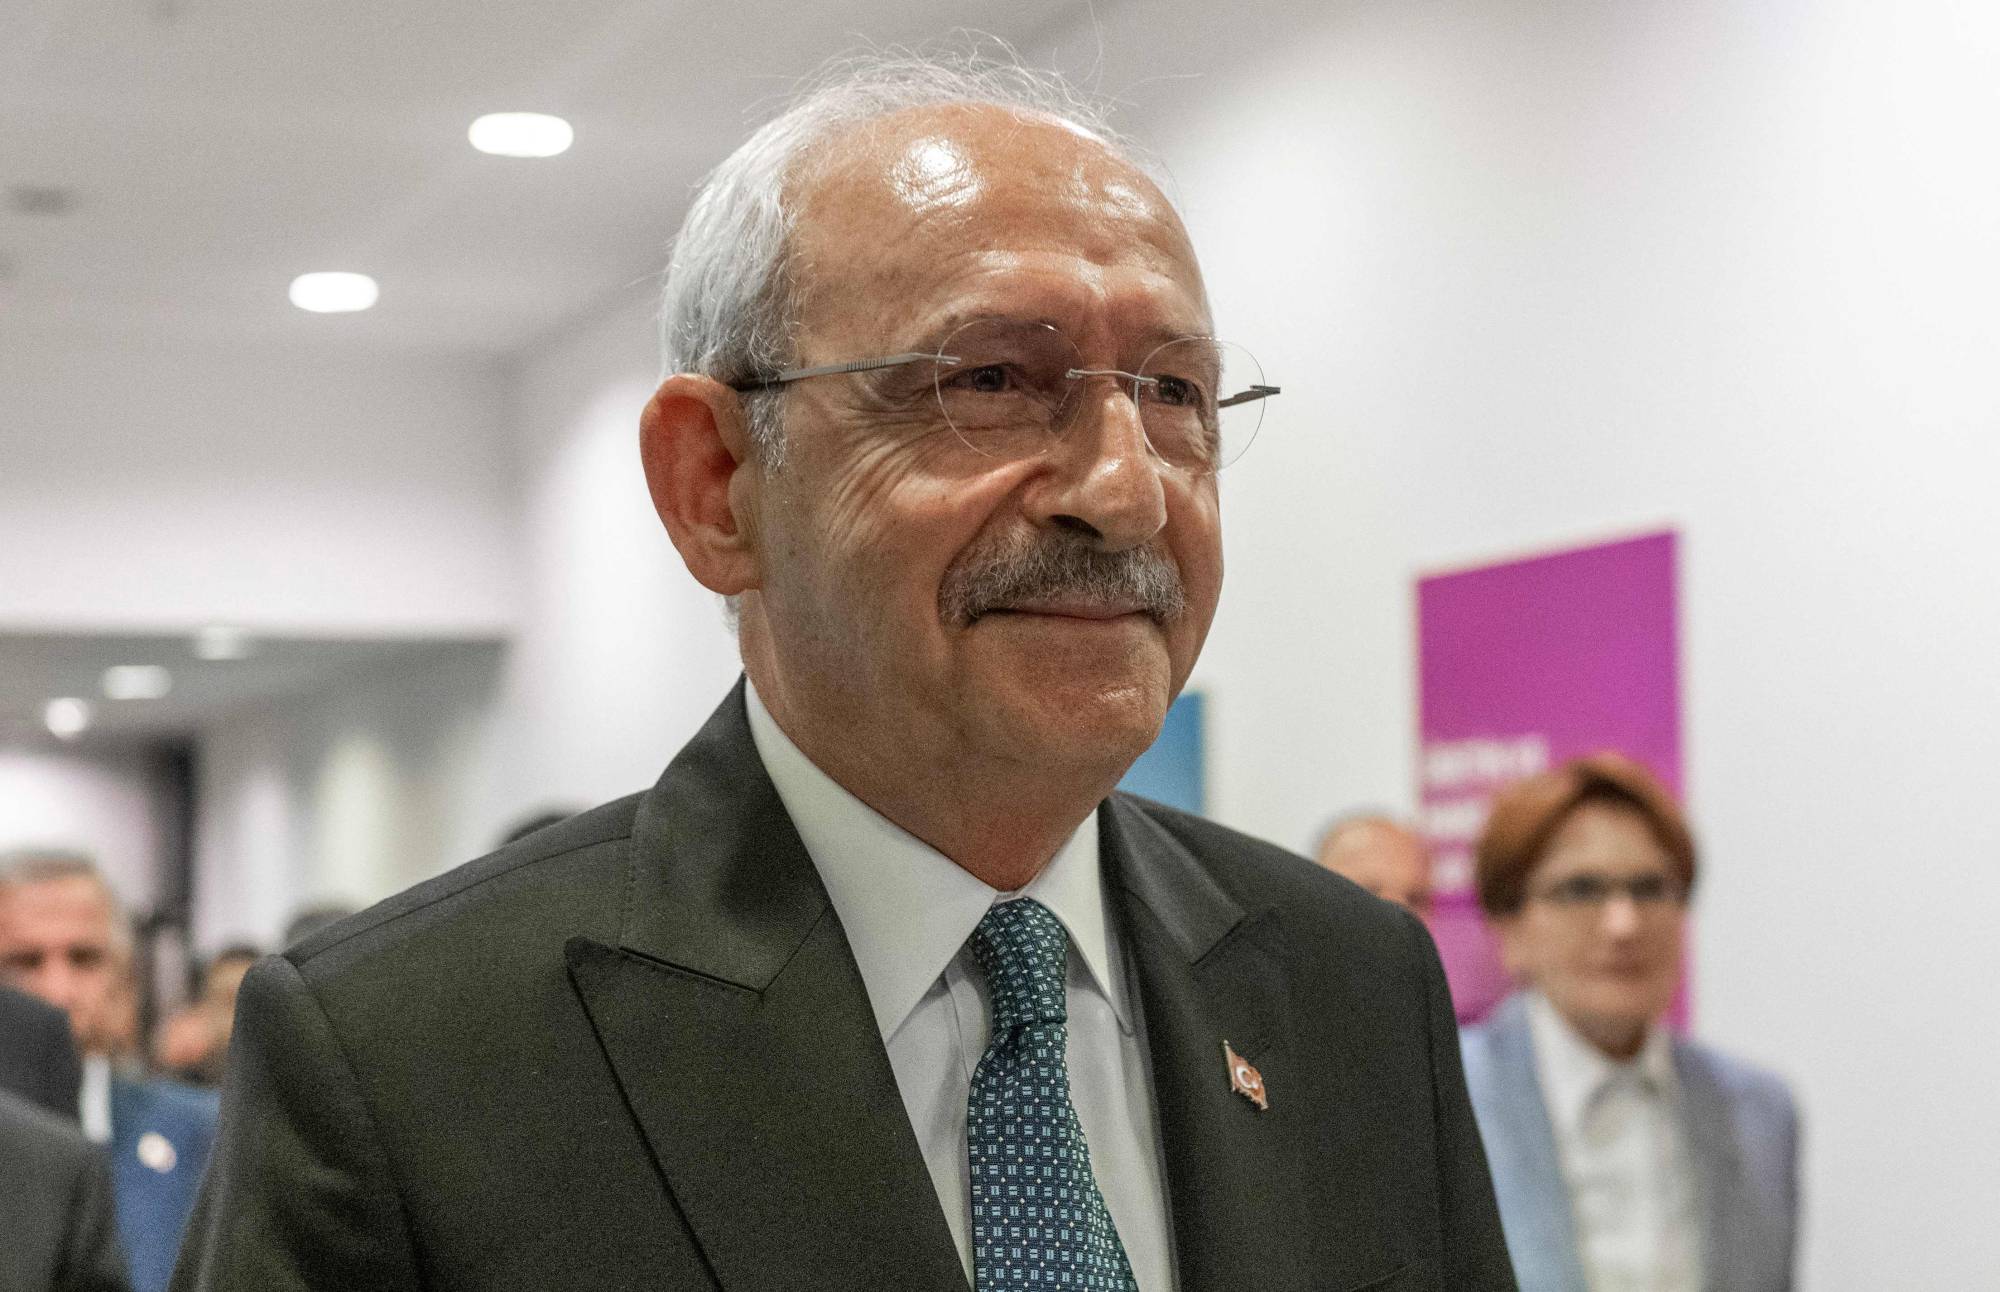 Kemal Kilicdaroglu, the 74-year-old leader of the center-left, pro-secular Republican People's Party, or CHP, arrives for a news conference in Ankara on Monday. | AFP-JIJI